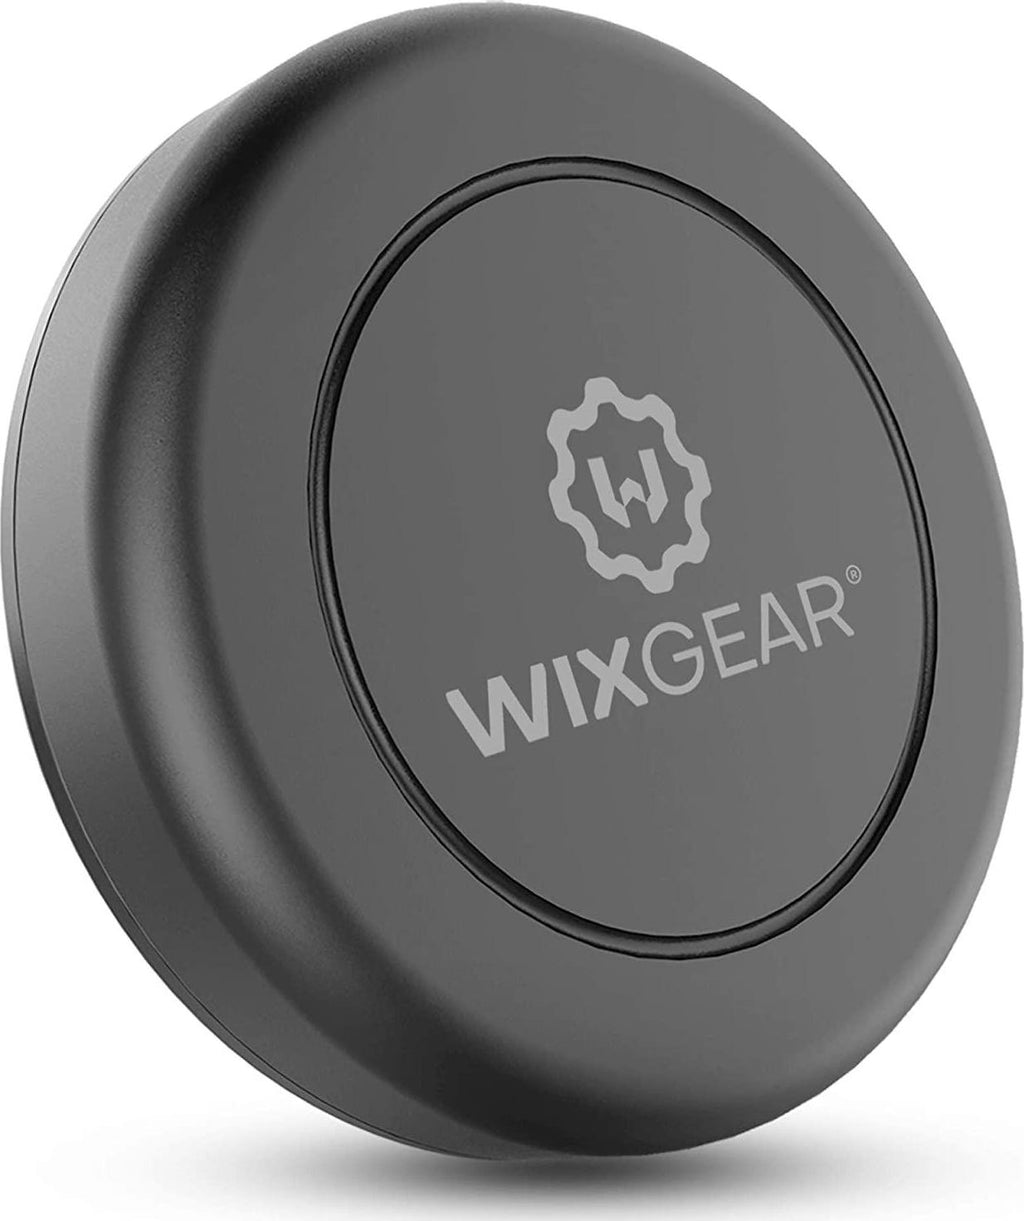 WixGear Universal Flat Stick On Dashboard Magnetic Car Mount Holder fo